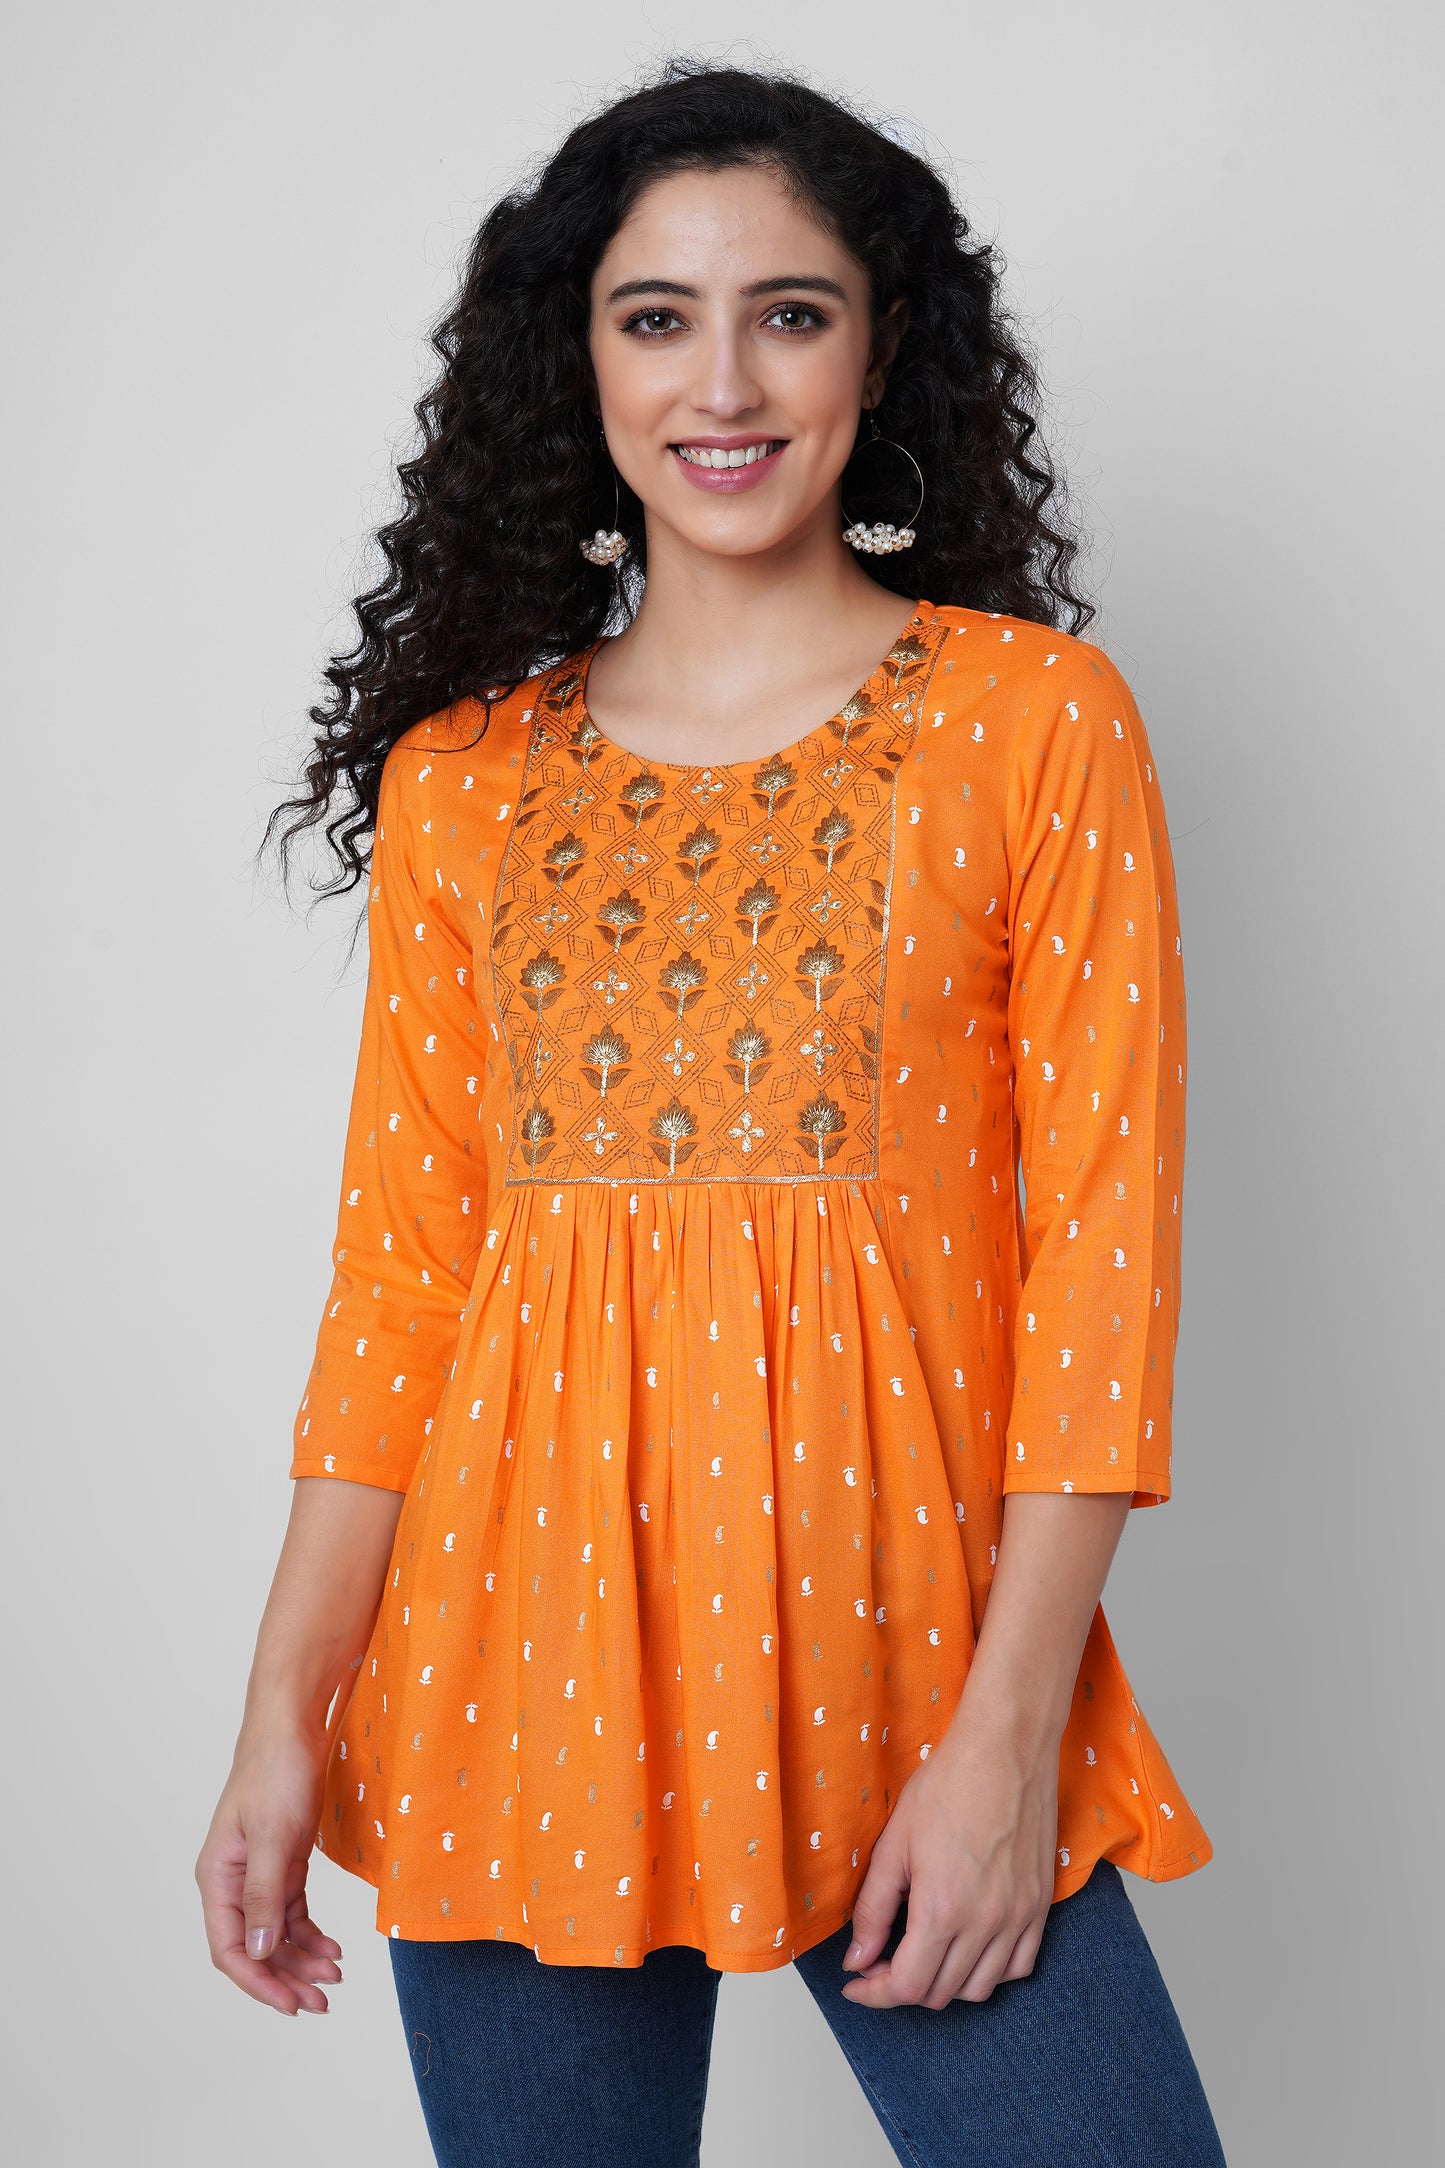 Orange Top With Brown Embroidery